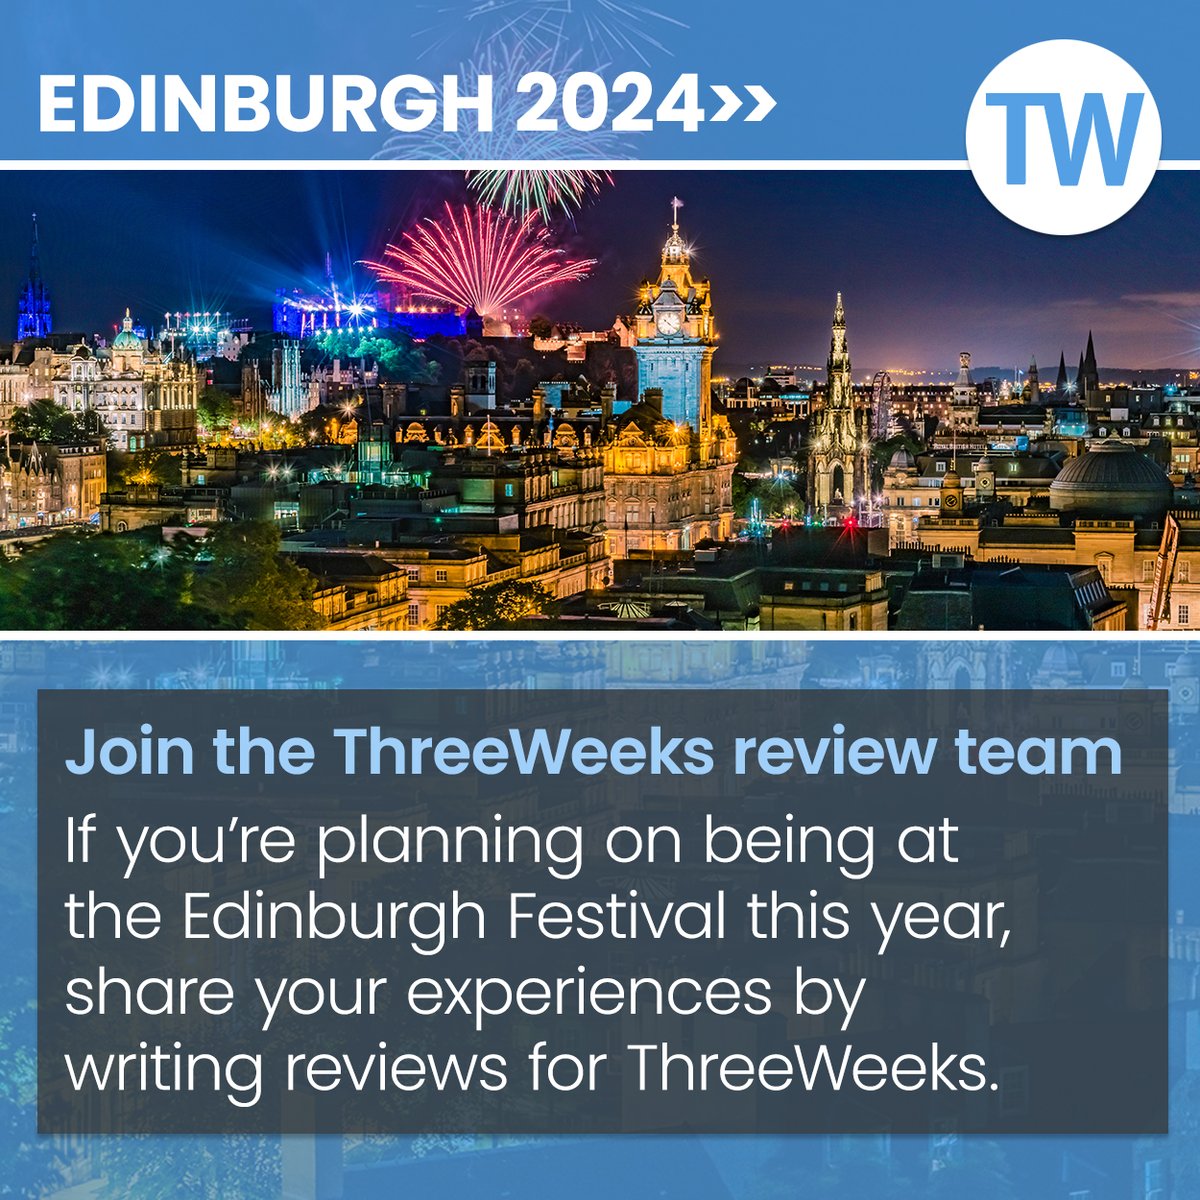 We are currently recruiting reviewers to join our team at Edinburgh Festival 2024 - info here: bit.ly/3JtrMkR